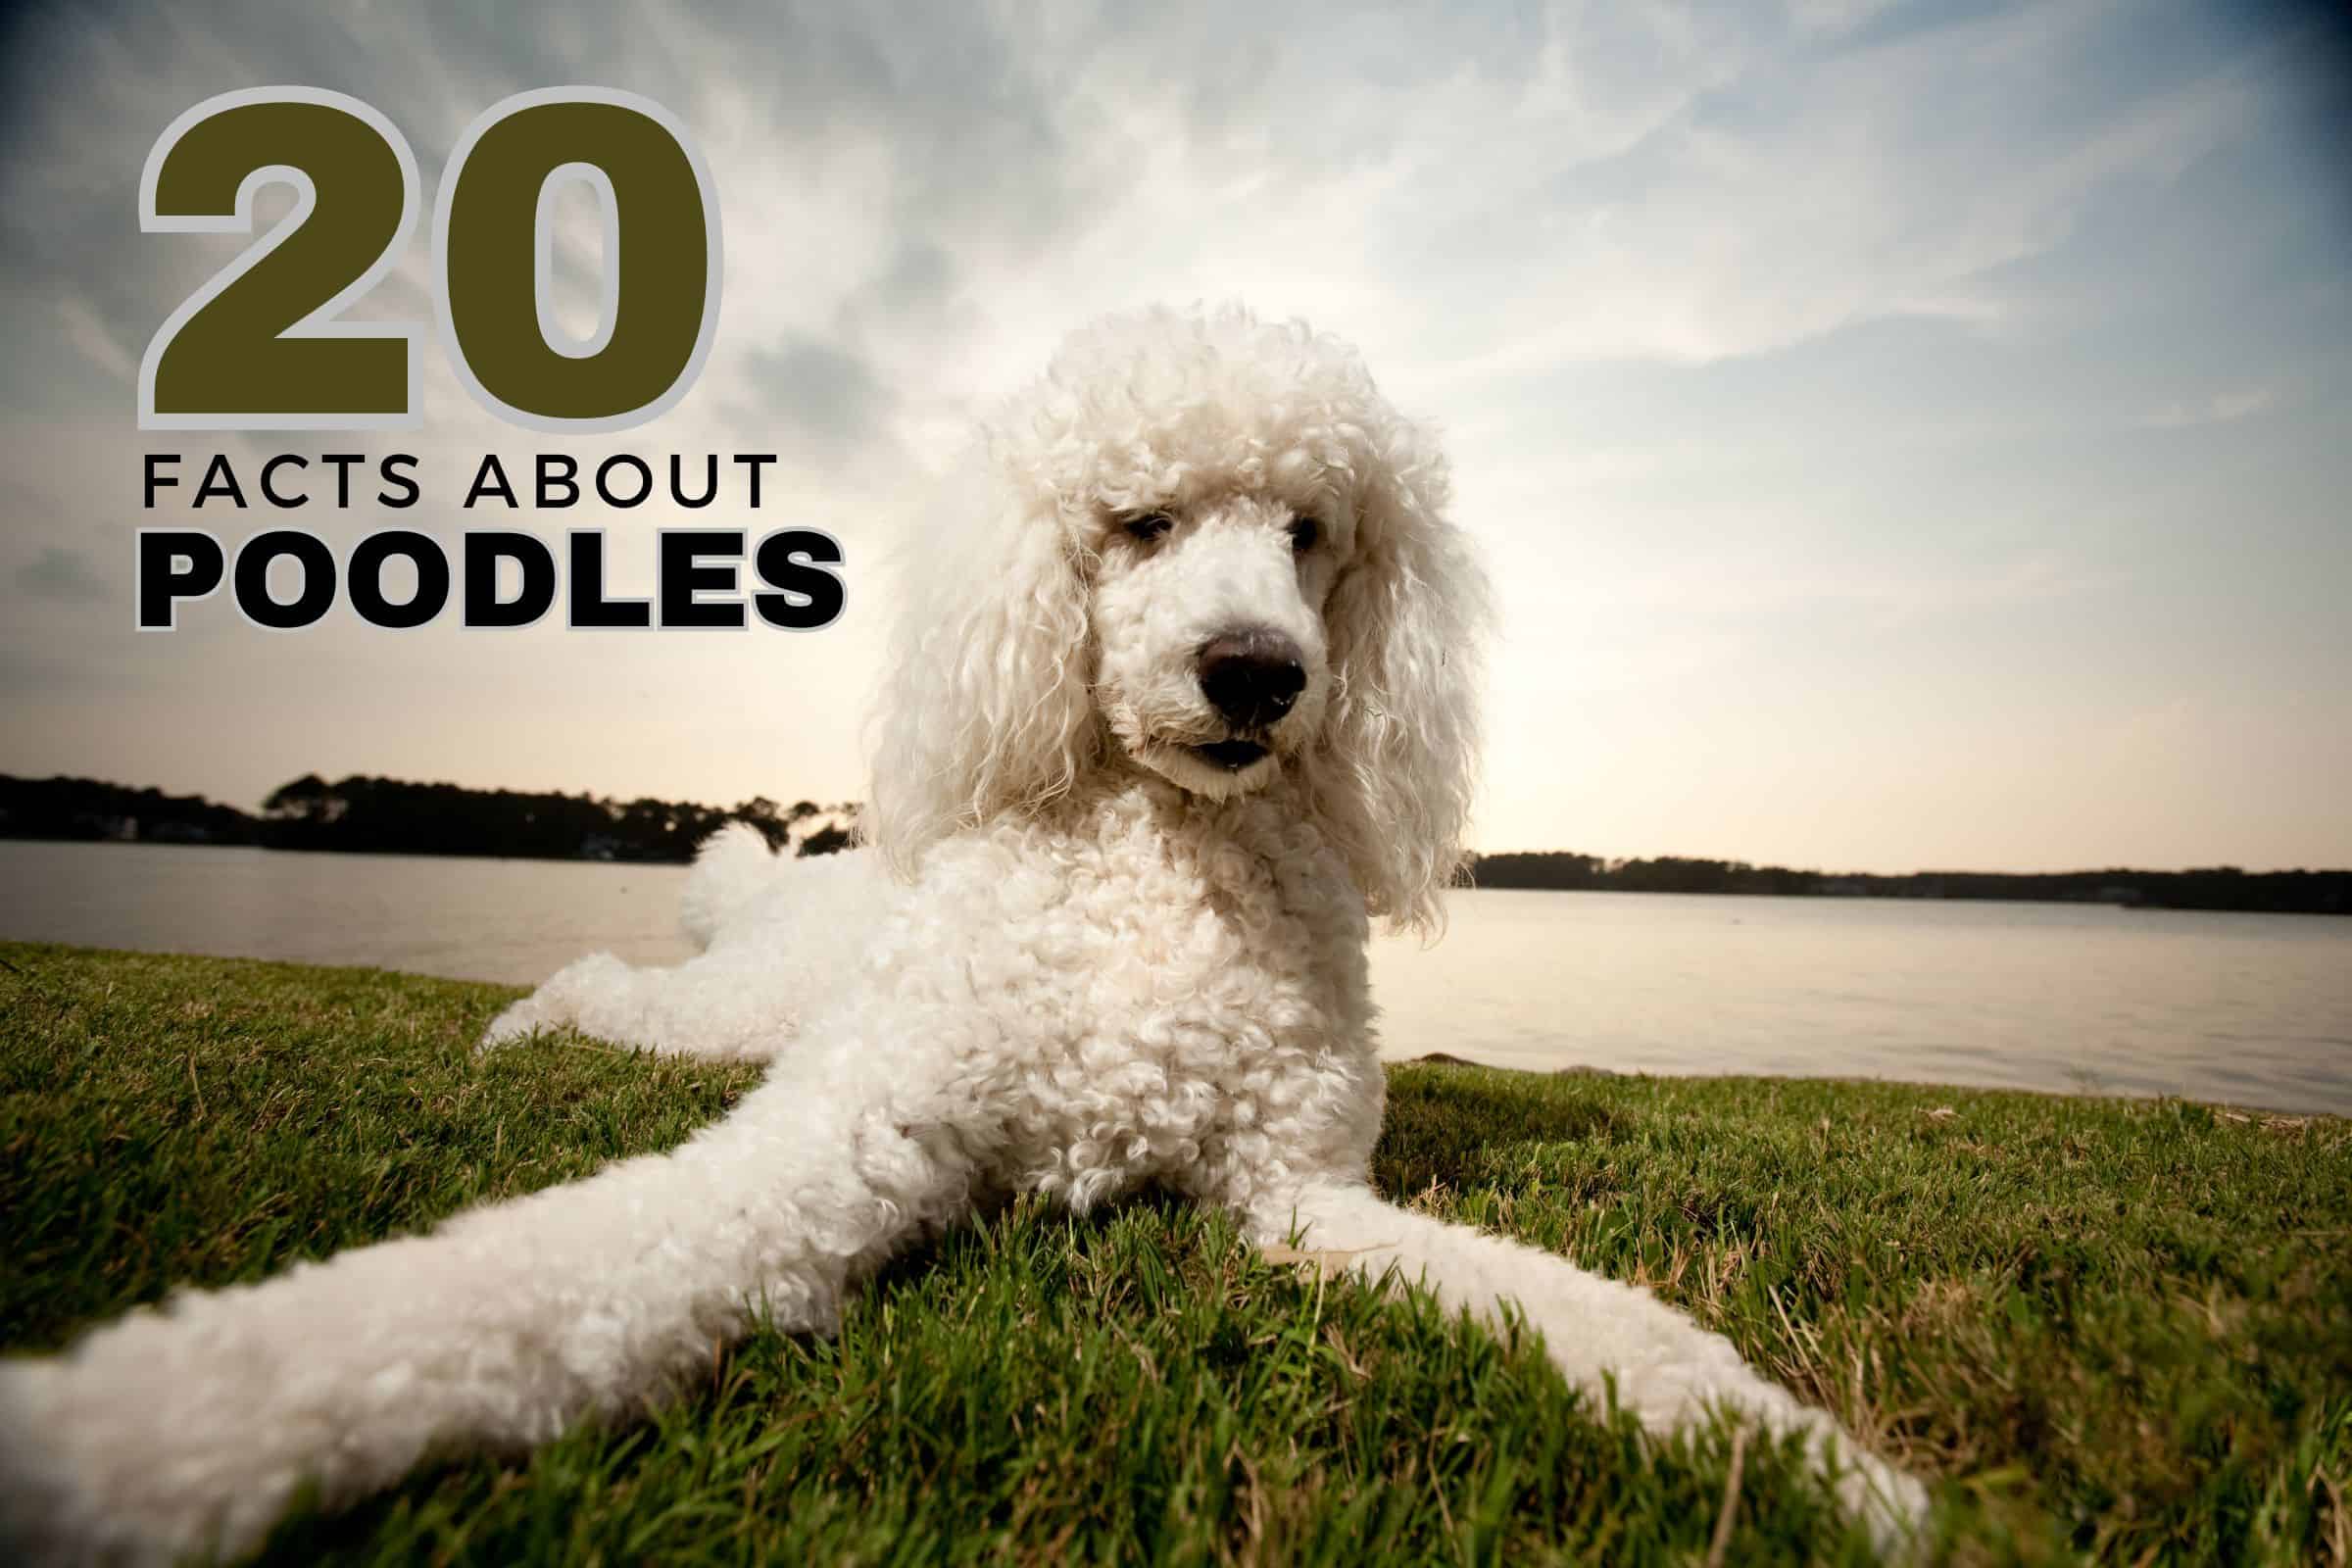 20 facts about poodles